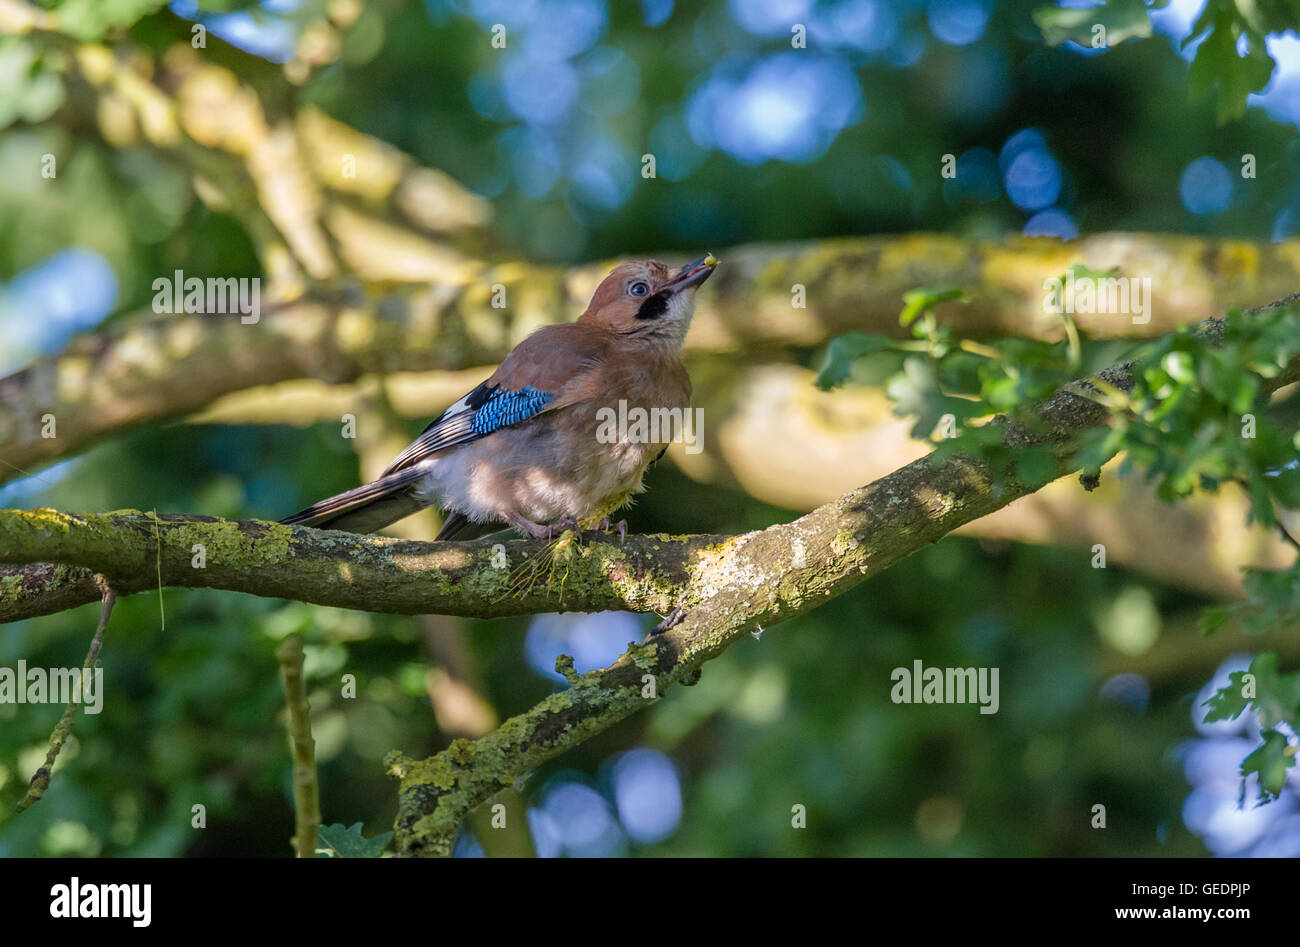 Juvenile Jay perched on a branch eating a barley seed. Stock Photo